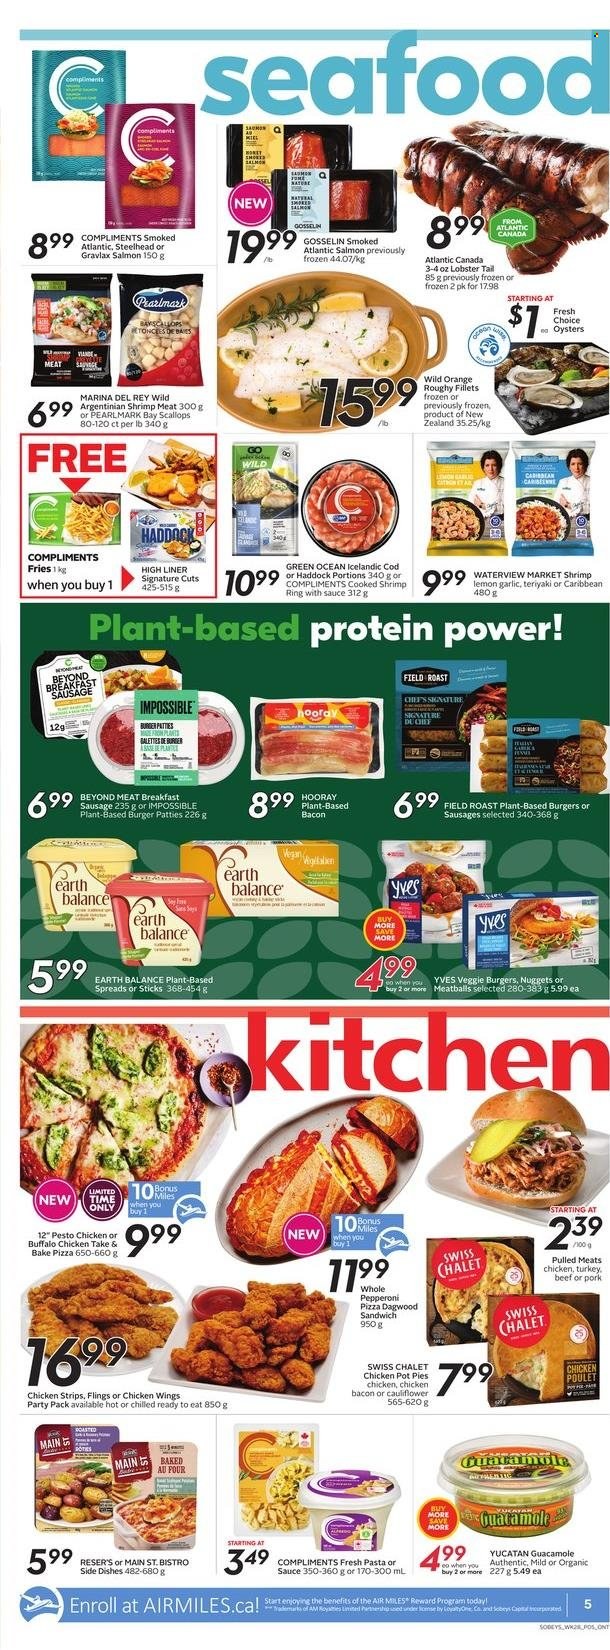 thumbnail - Sobeys Flyer - November 04, 2021 - November 10, 2021 - Sales products - pot pie, garlic, cod, lobster, salmon, scallops, haddock, oysters, lobster tail, shrimps, pizza, meatballs, nuggets, dagwood, veggie burger, bacon, sausage, pepperoni, guacamole, chicken wings, strips, chicken strips, potato fries, burger patties, oranges. Page 8.